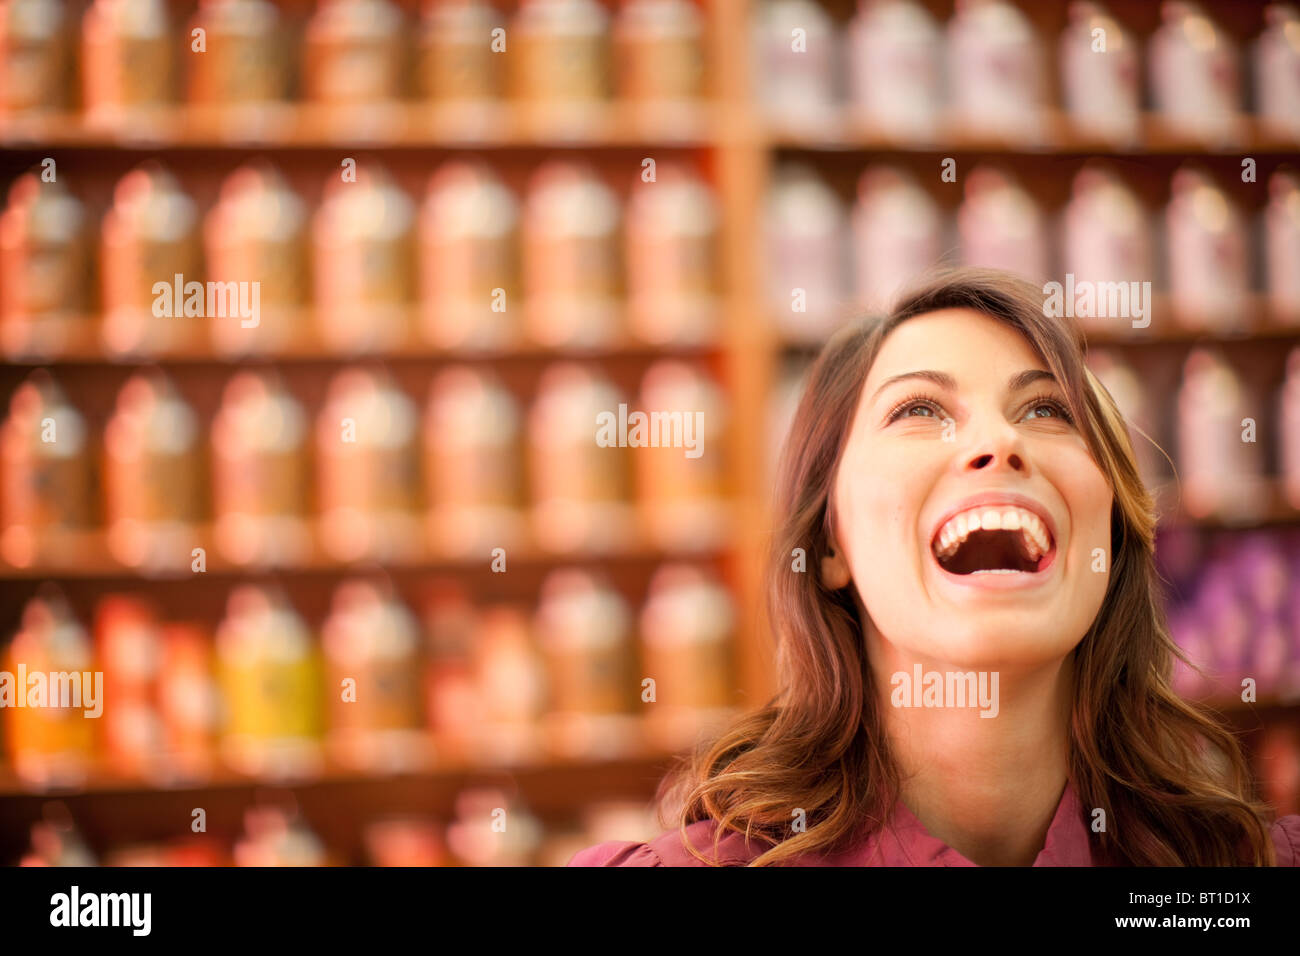 Caucasian woman looking up and laughing Stock Photo